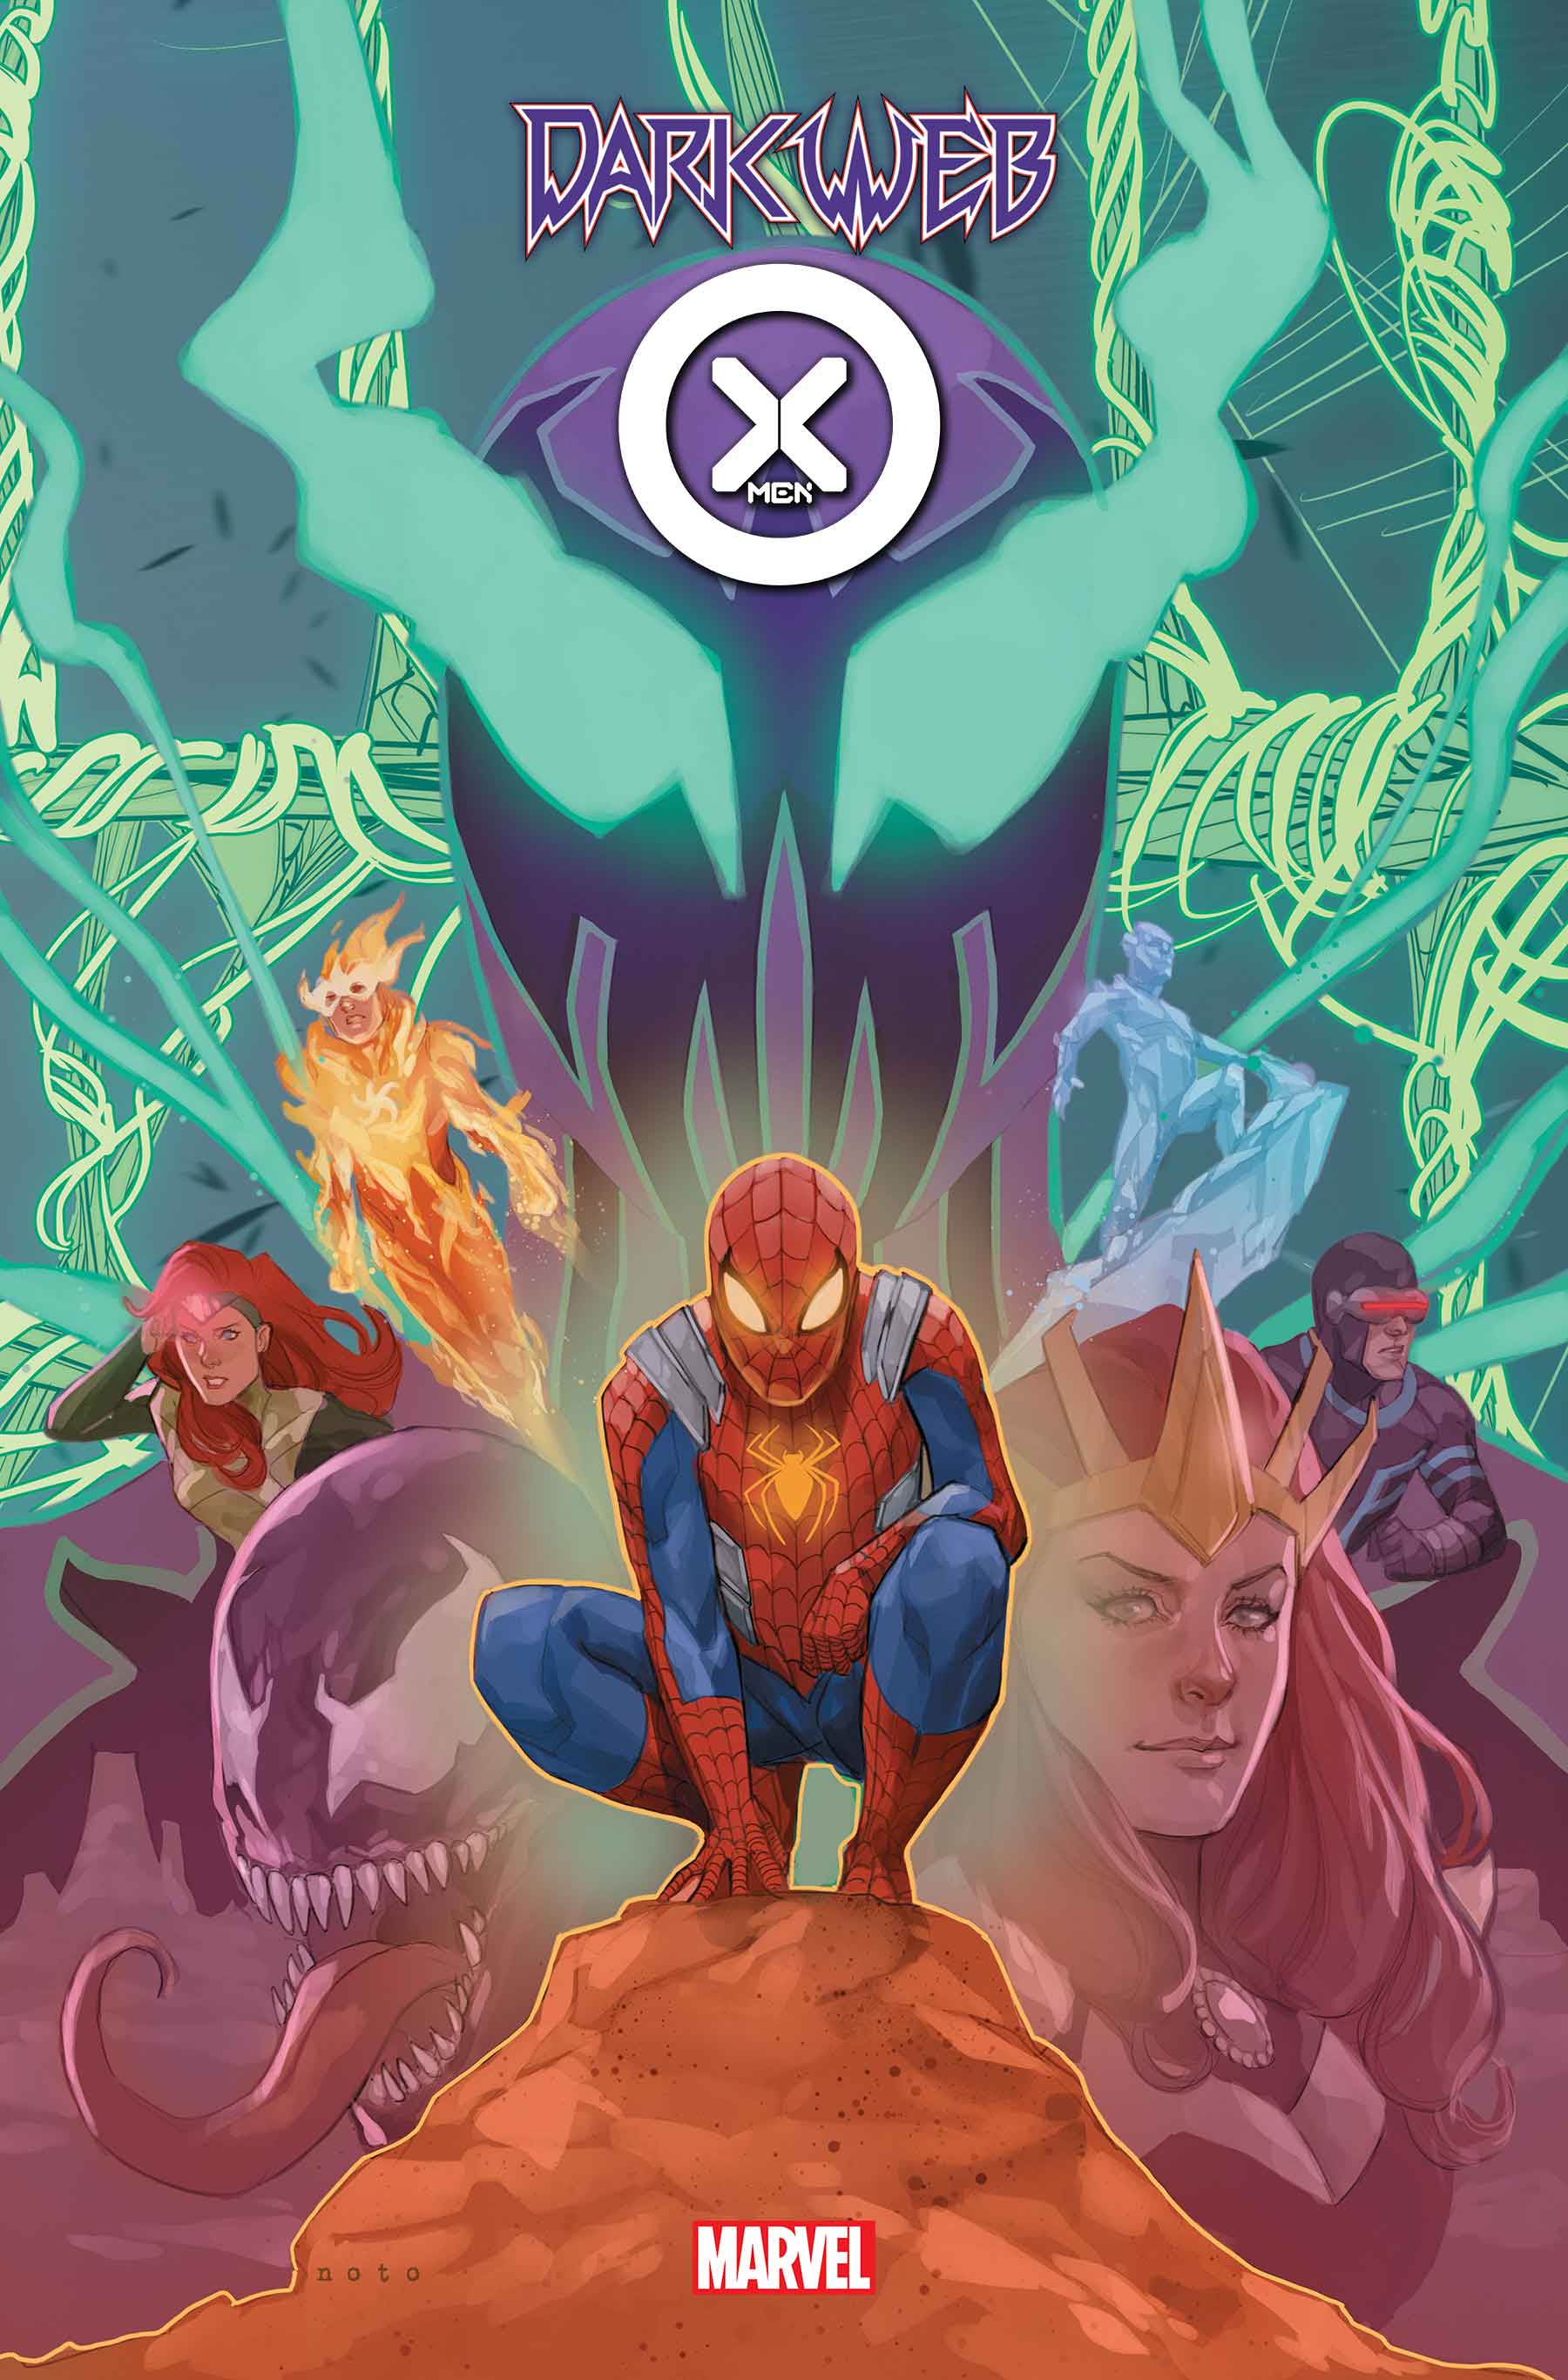 The cover of Dark Web: X-Men #1 with Spider-Man crouching between Venom and Scarlet Witch, with Jean Grey, Firestar, Iceman, and Cyclops in the background